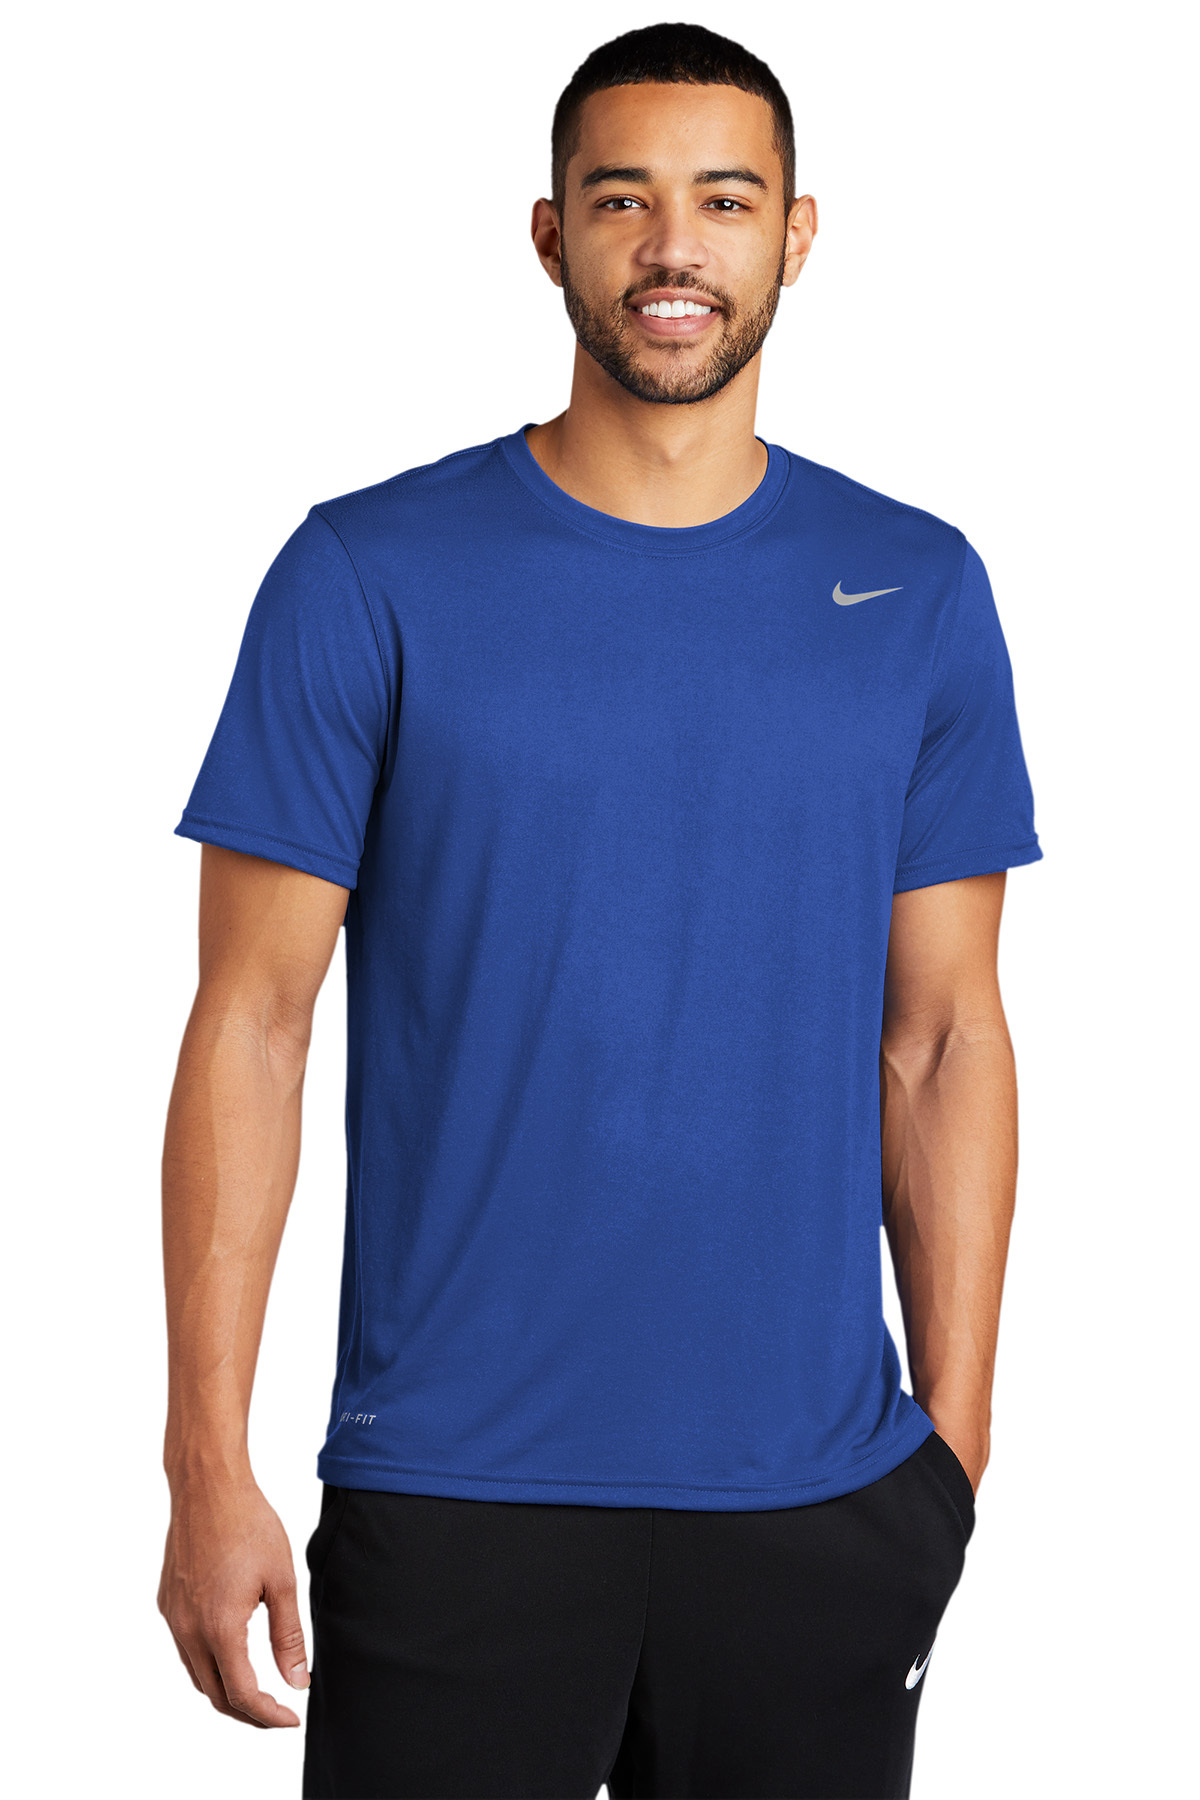 Nike Legend Tee | Product | Company Casuals